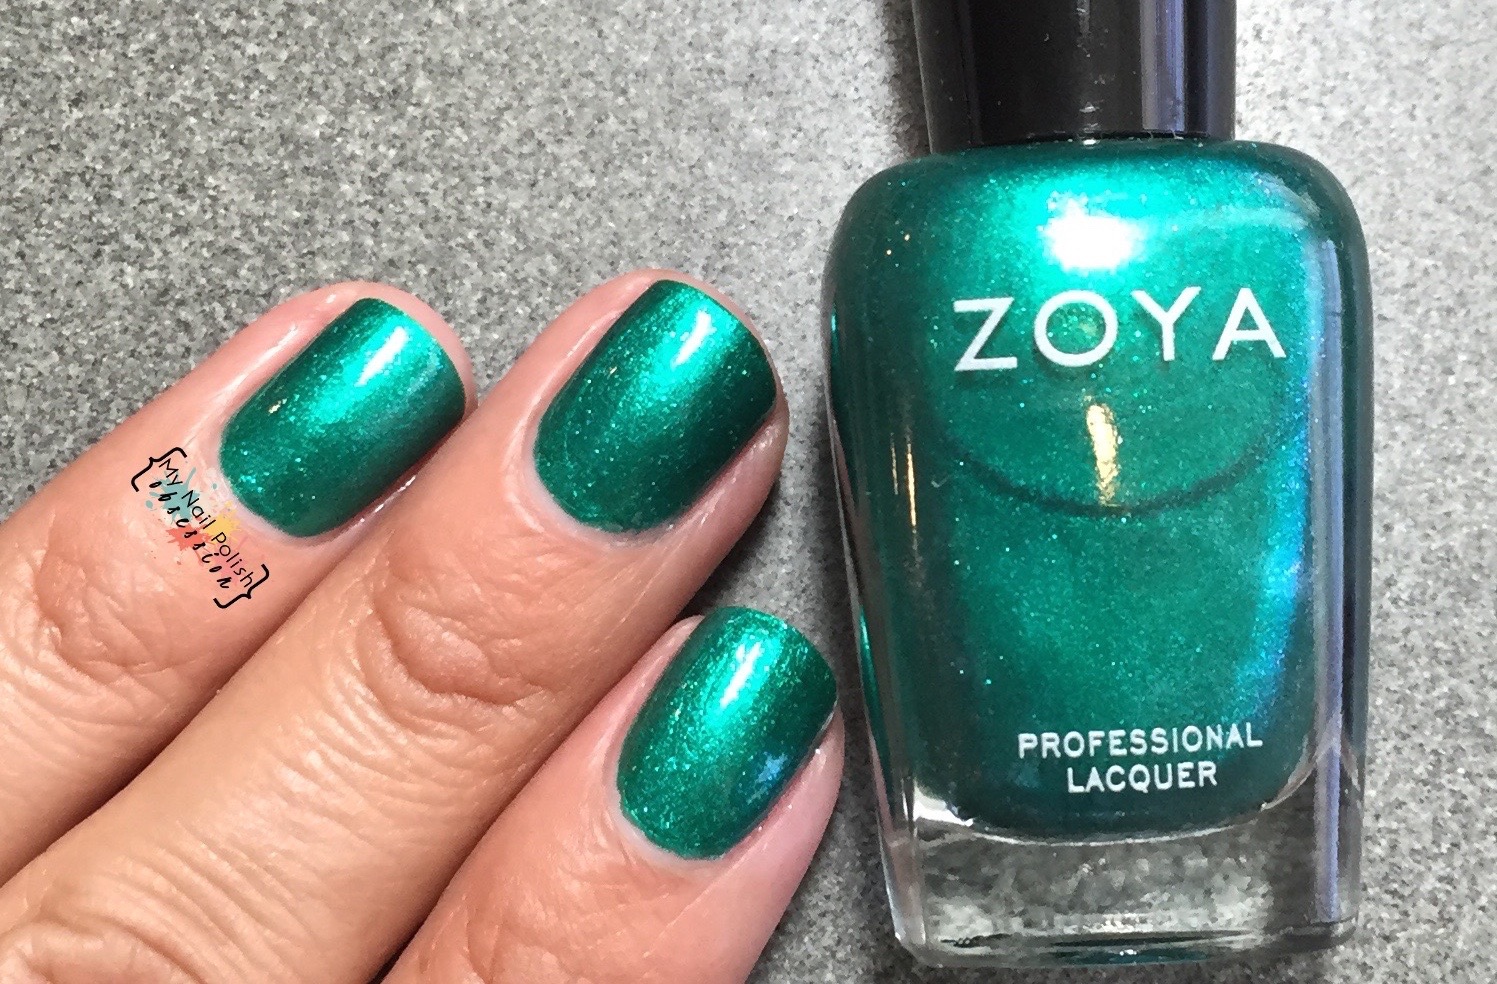 2. Zoya Nail Polish - Professional Nail Lacquer in "Business" - wide 8